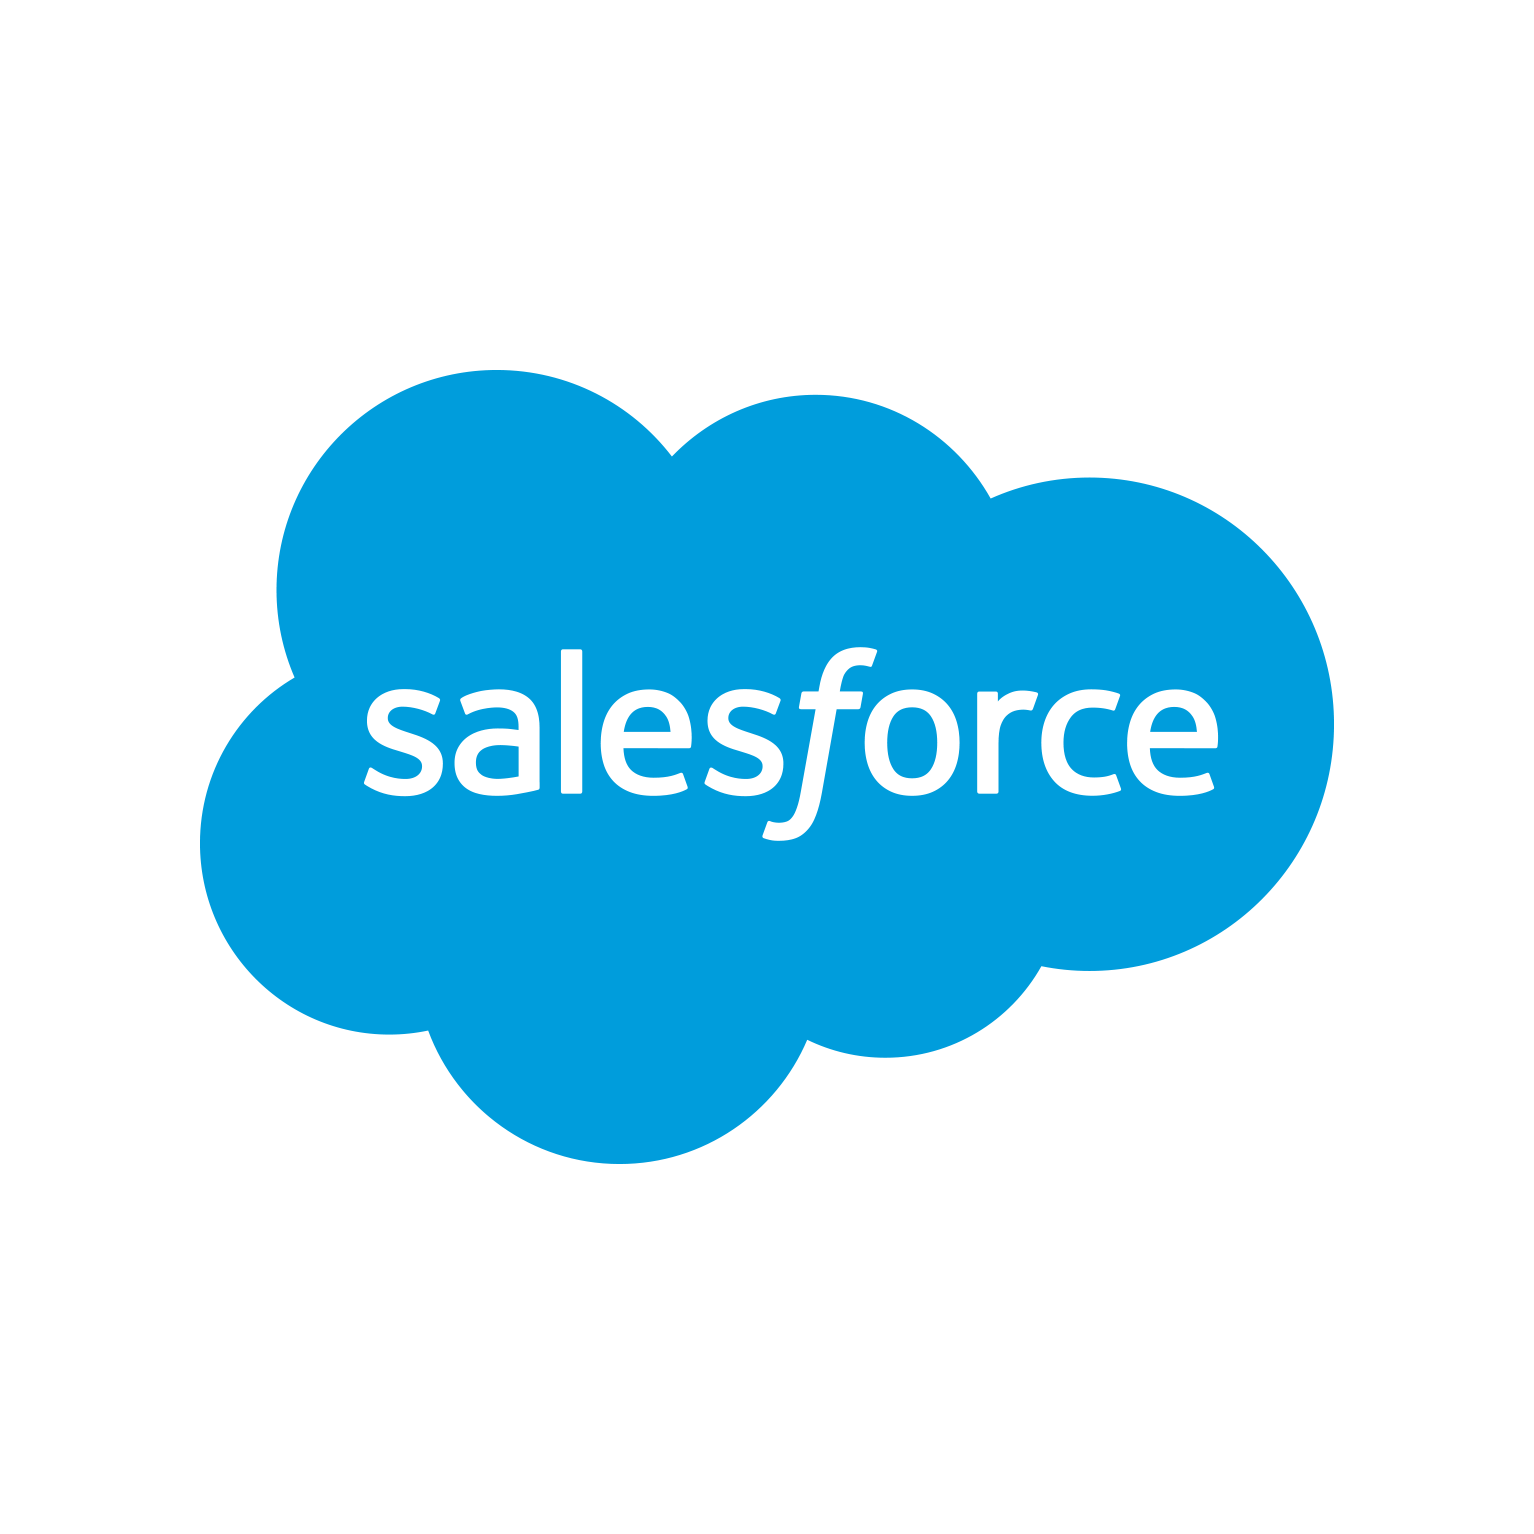 Salesforce-square.png